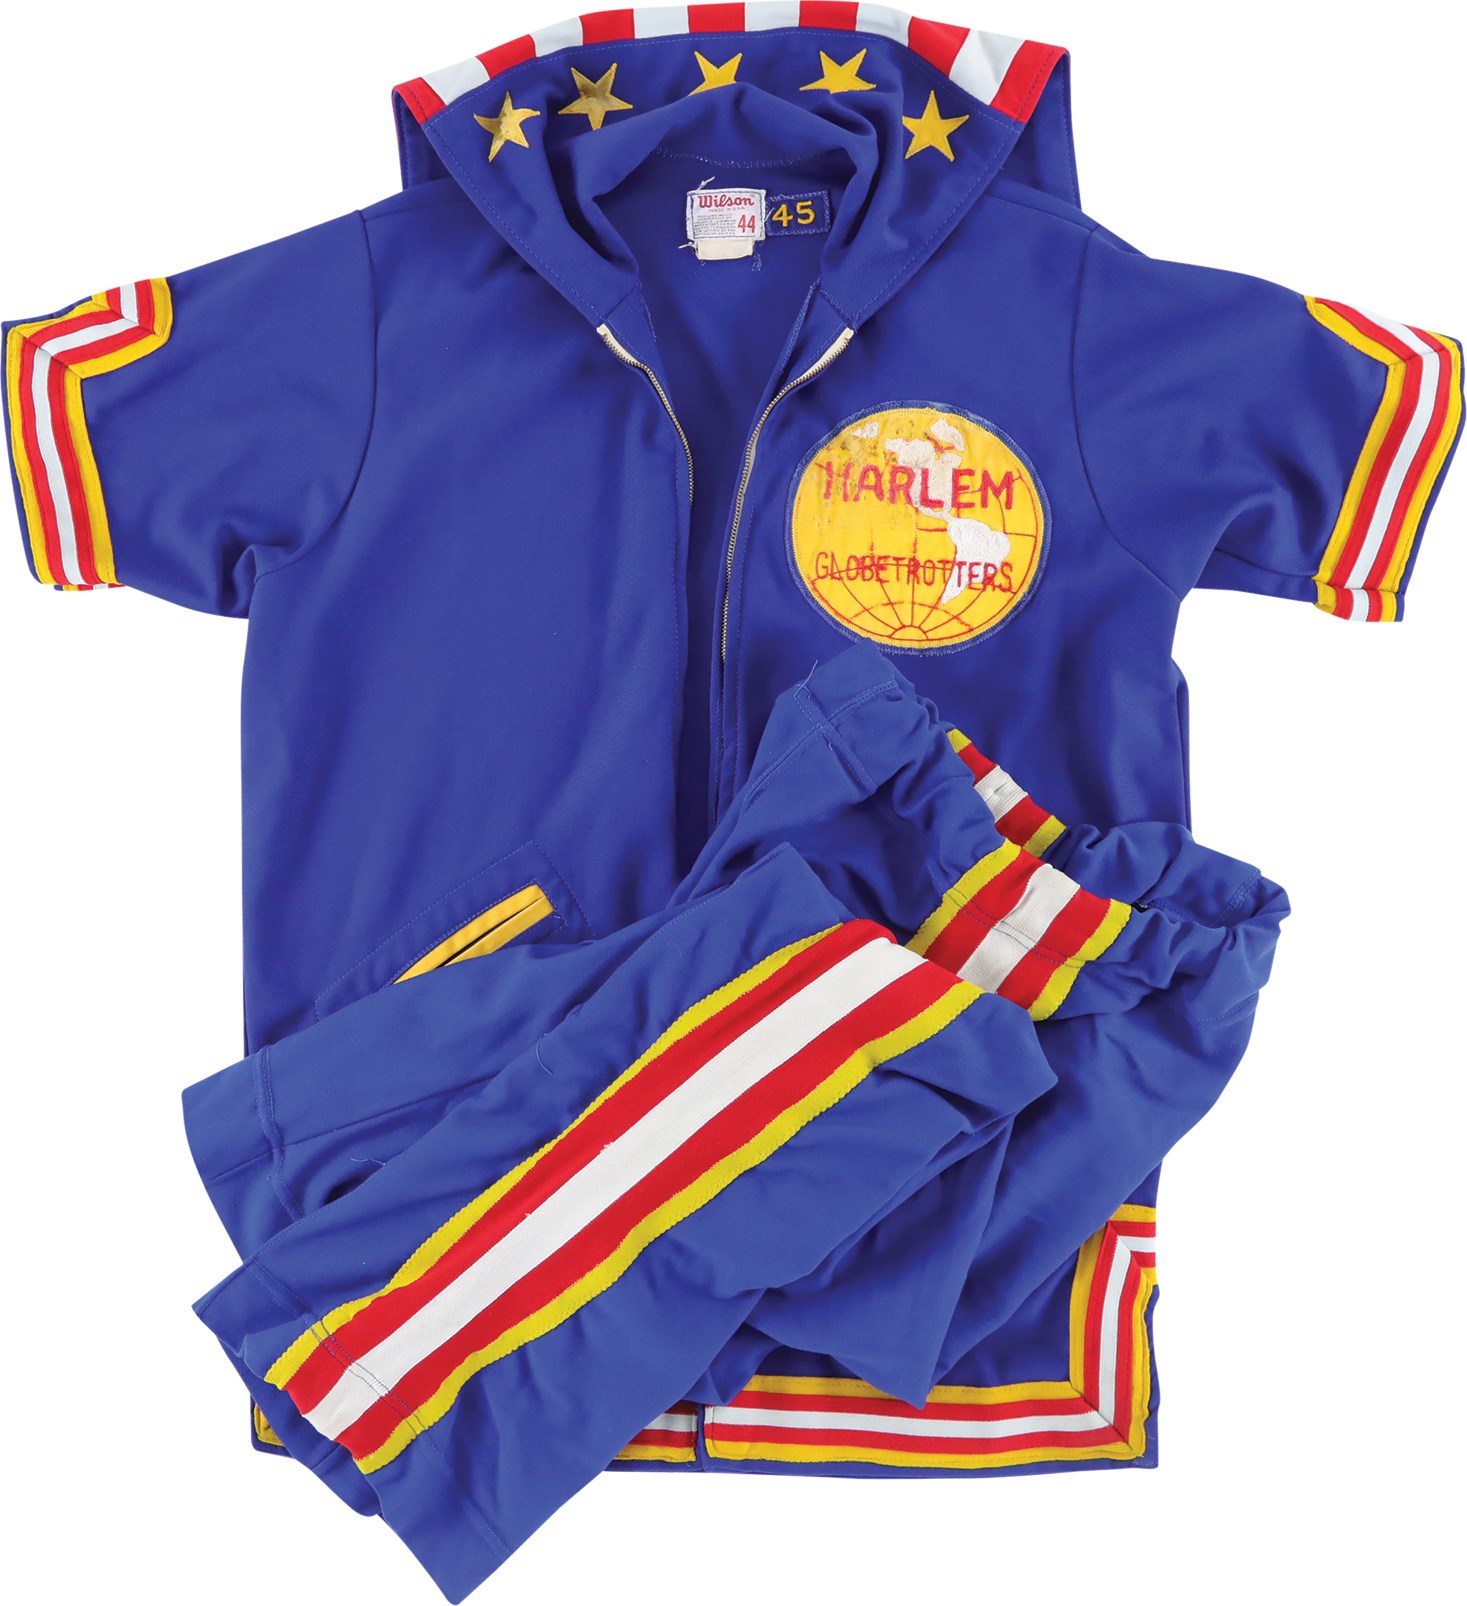 - Harlem Globetrotters Warmup Suit with Curly Neal Pants